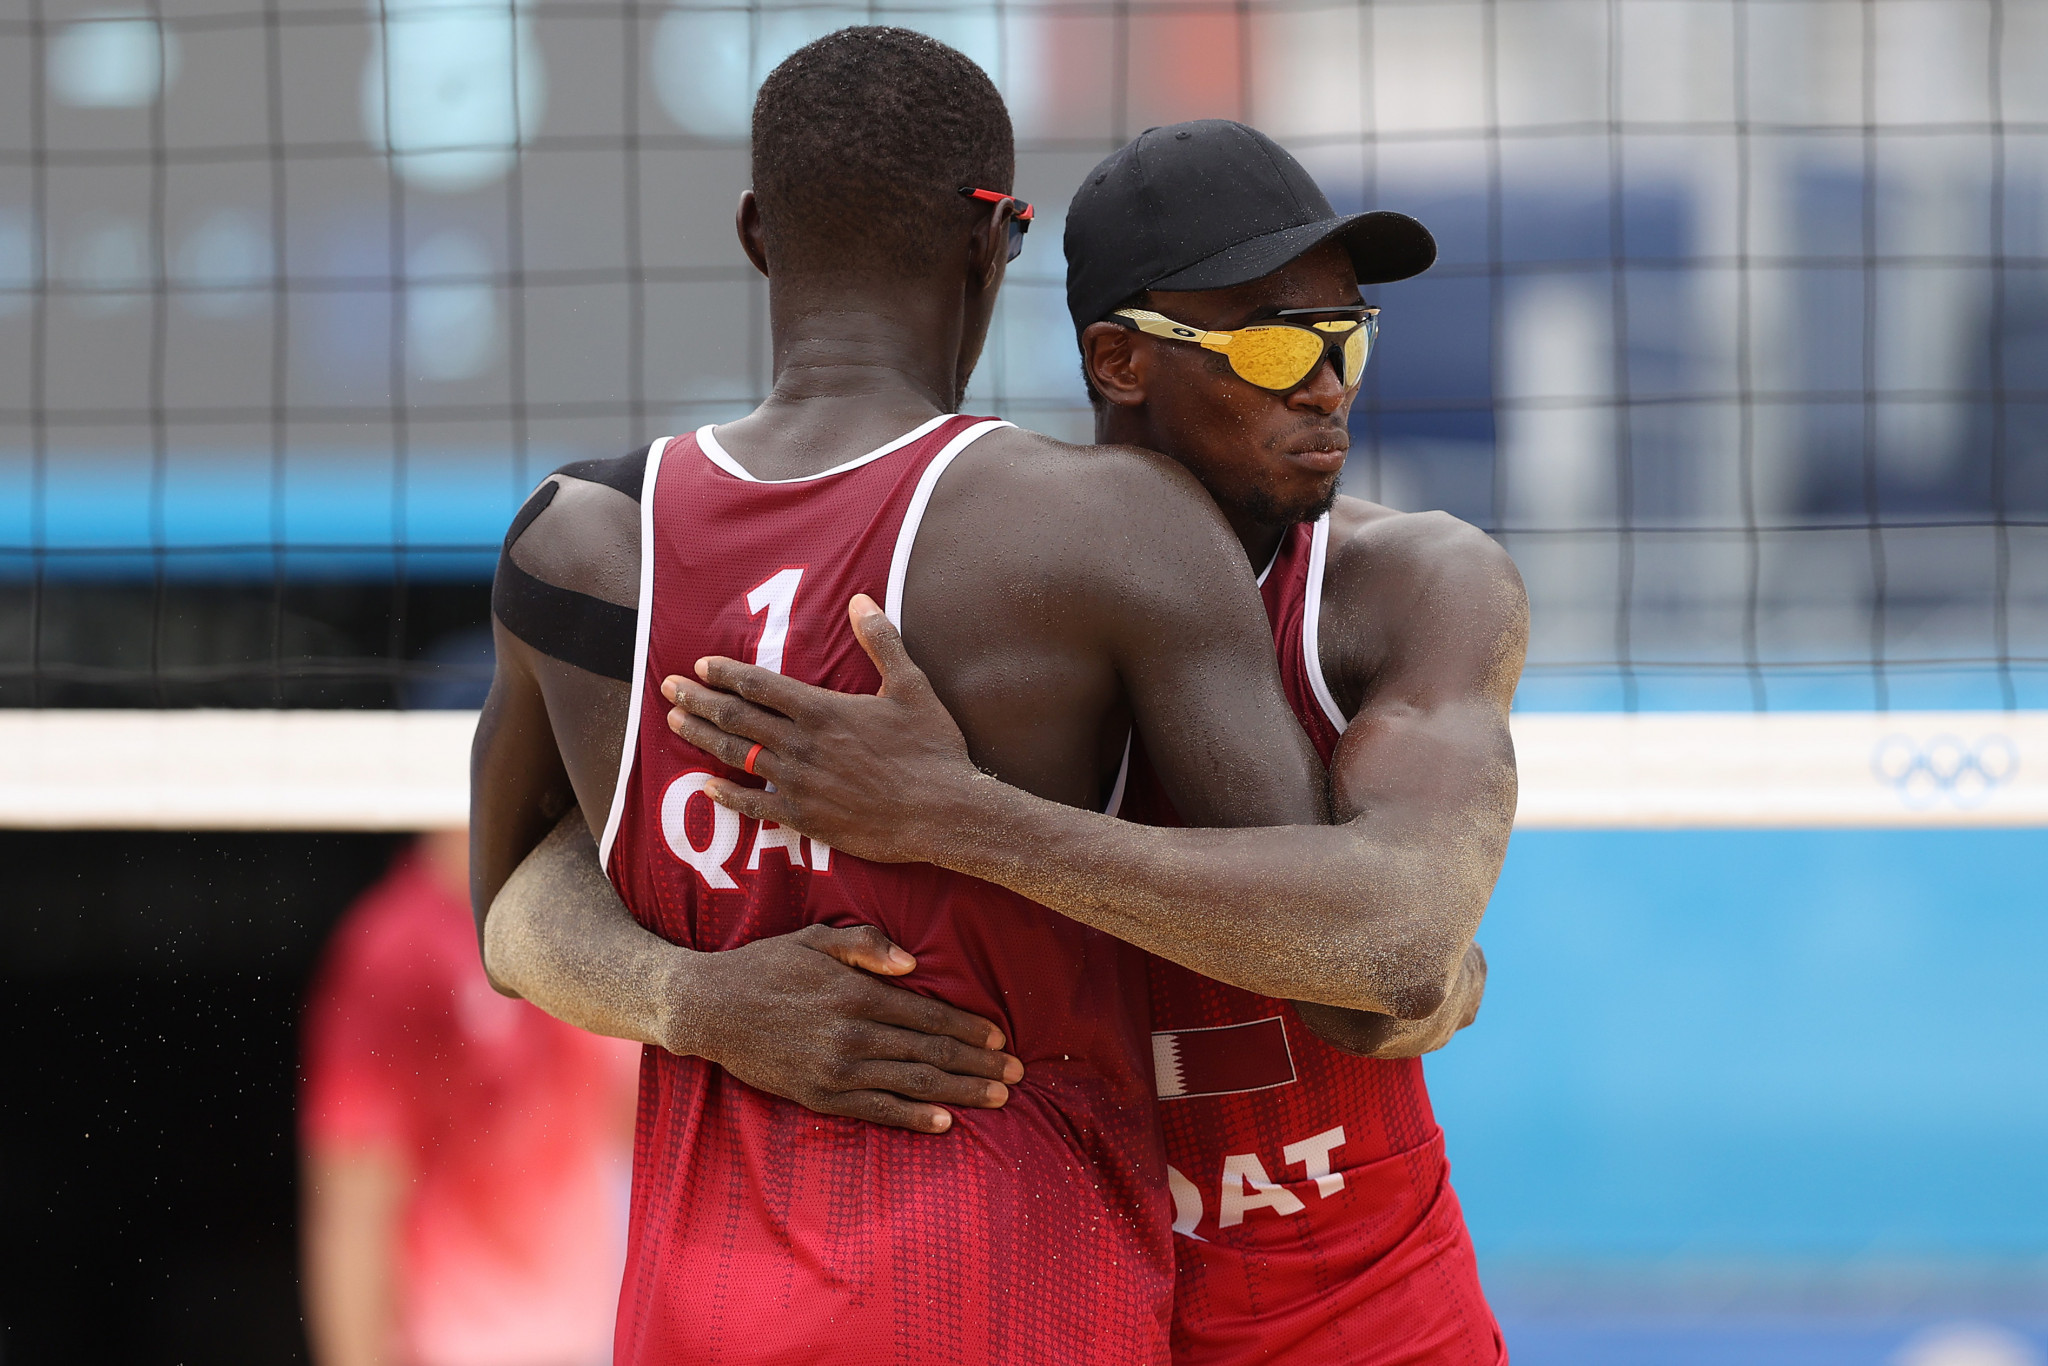 Cherif Younousse, left, and Ahmed Tijan, right, exited the competition in the round of 16 stage ©Getty Images